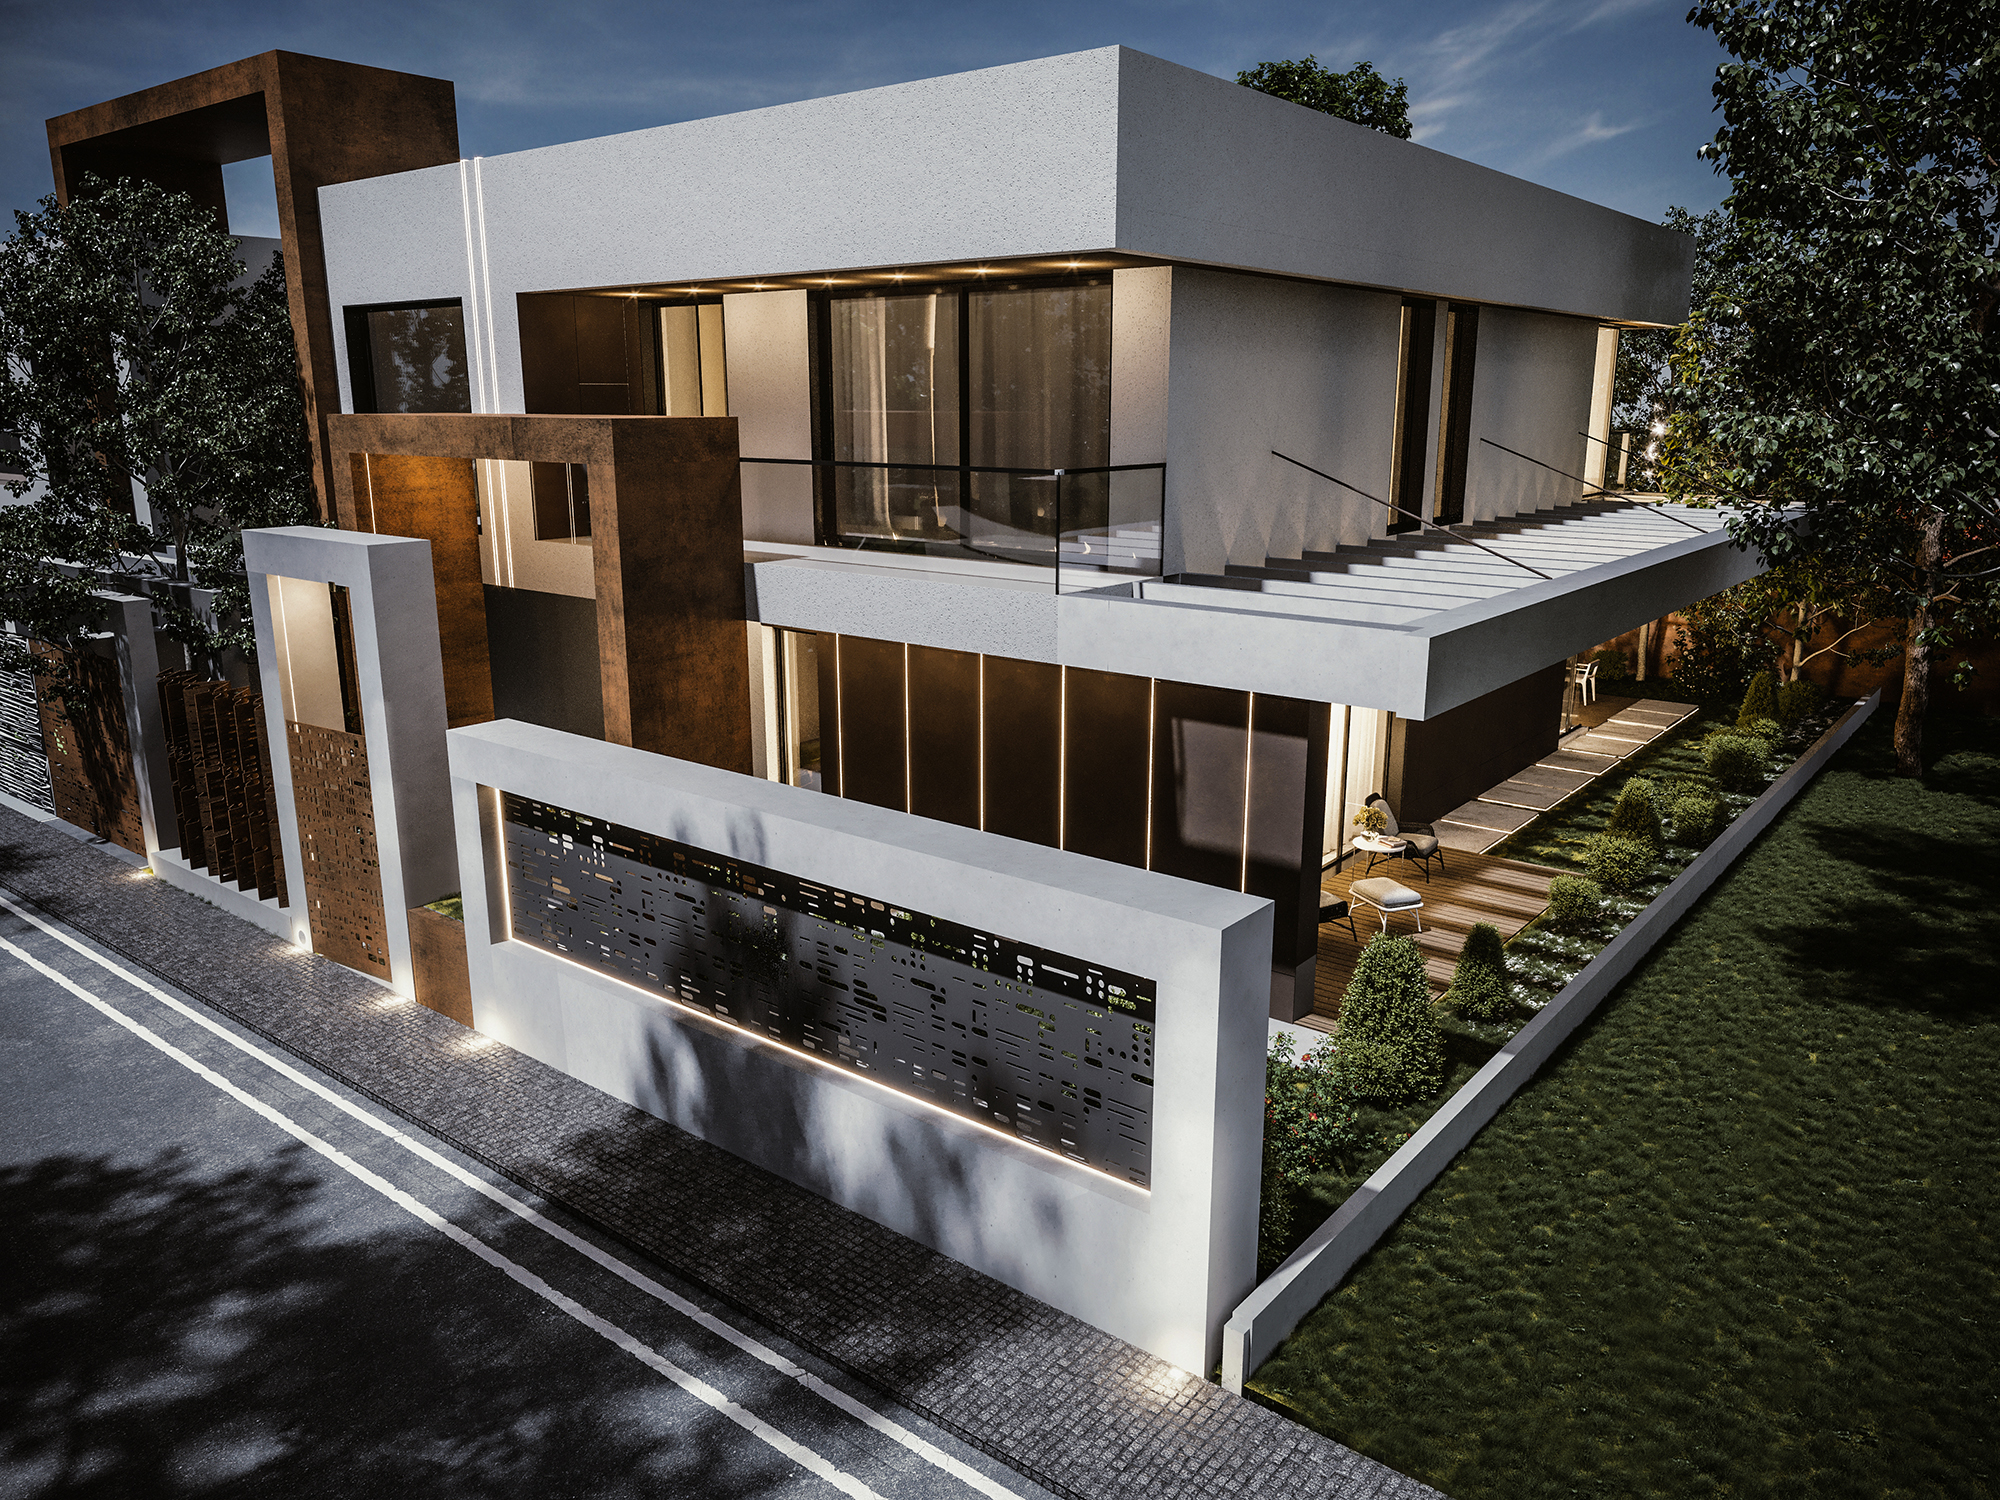 SENARIA delivers the new luxury project Oxygen Home